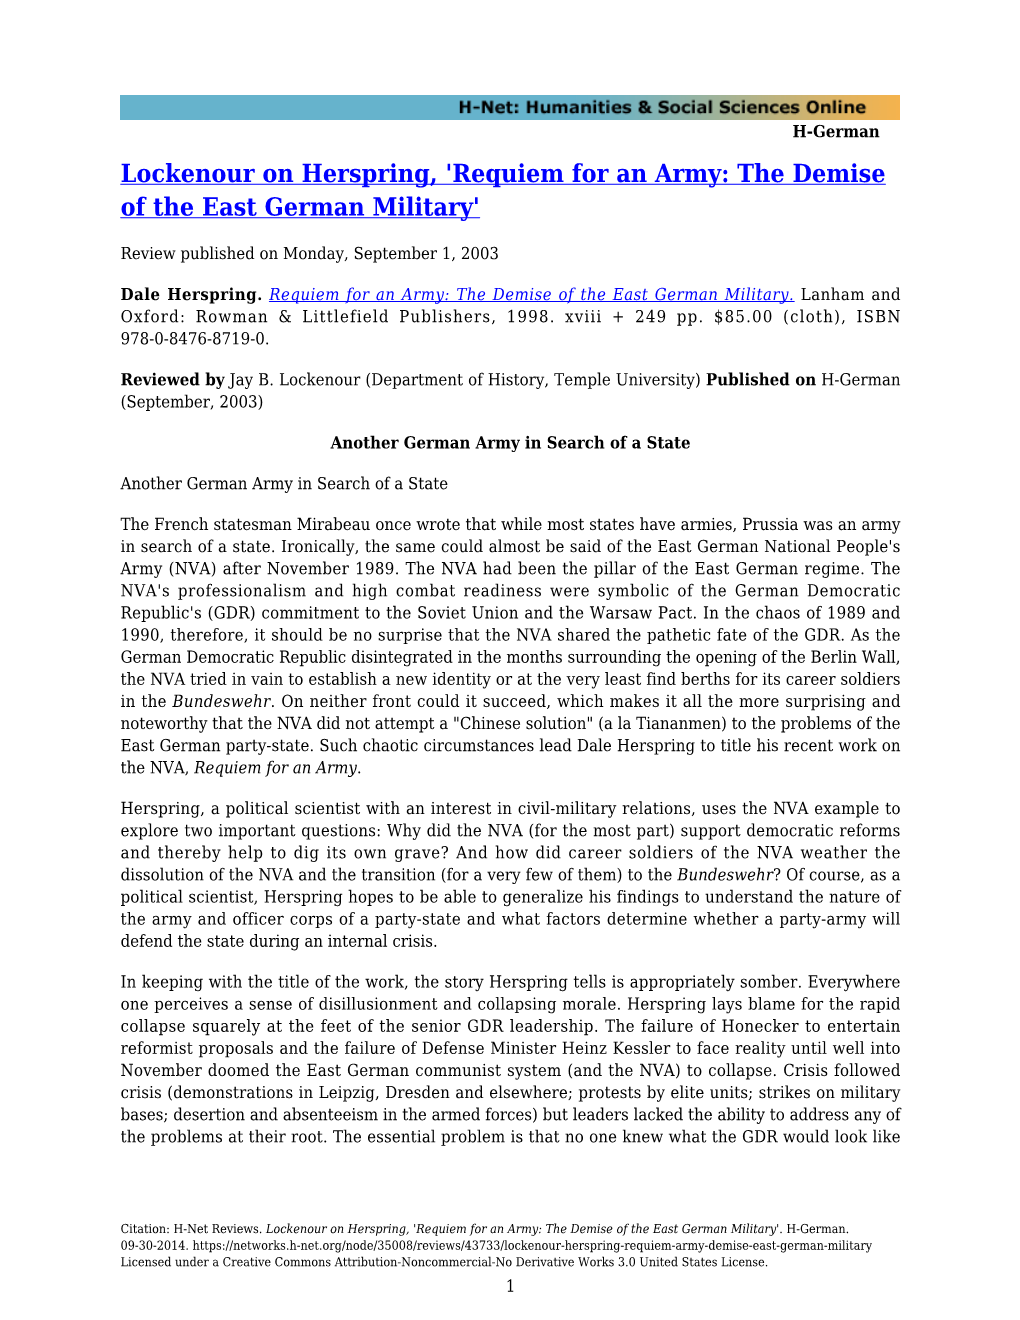 Lockenour on Herspring, 'Requiem for an Army: the Demise of the East German Military'